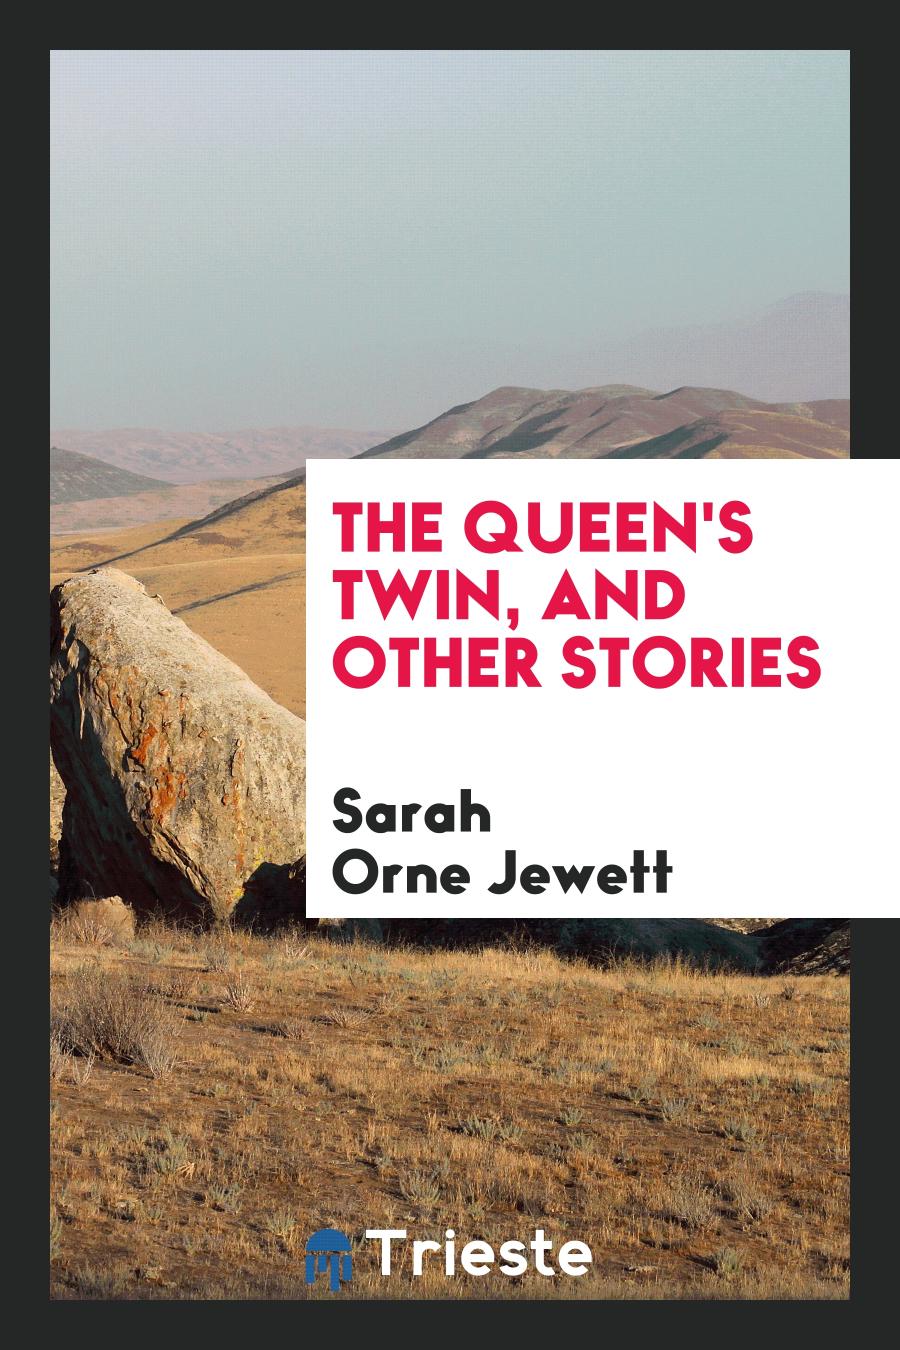 The queen's twin, and other stories